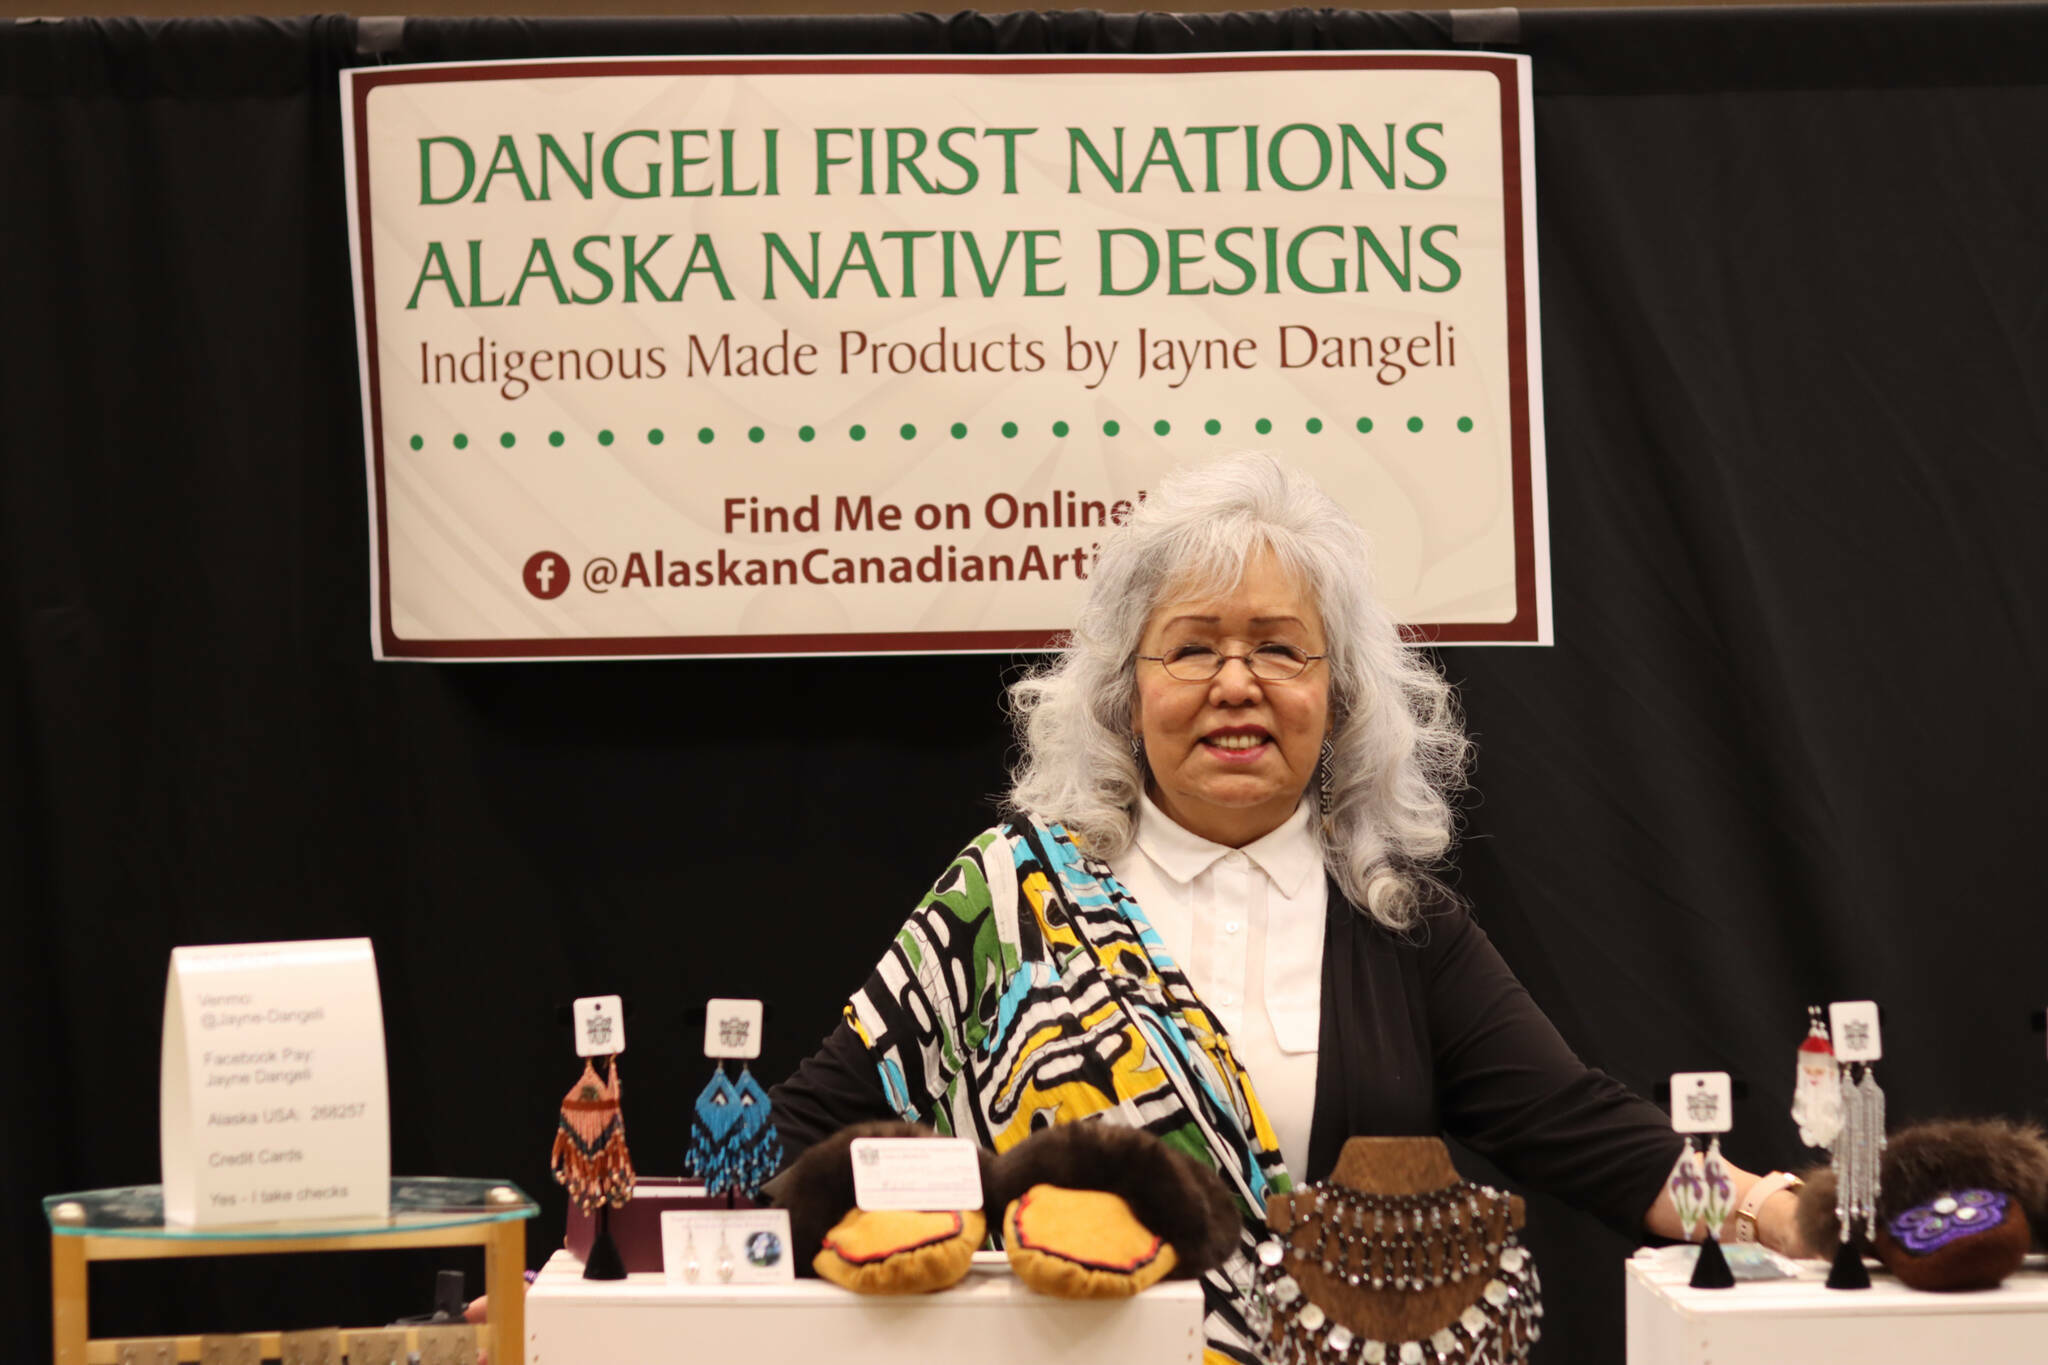 Local artist and 40-year Juneau resident Jayne Dangeli features her handmade Indigenous products through her store, Dangeli First Nations Alaska Native Designs, at the Indigenous Artists Vendors Holiday Market on Nov. 25, 2022. The market is again scheduled to overlap the Juneau Public Market from noon-5 p.m. Friday through Sunday. (Jonson Kuhn / Juneau Empire File)